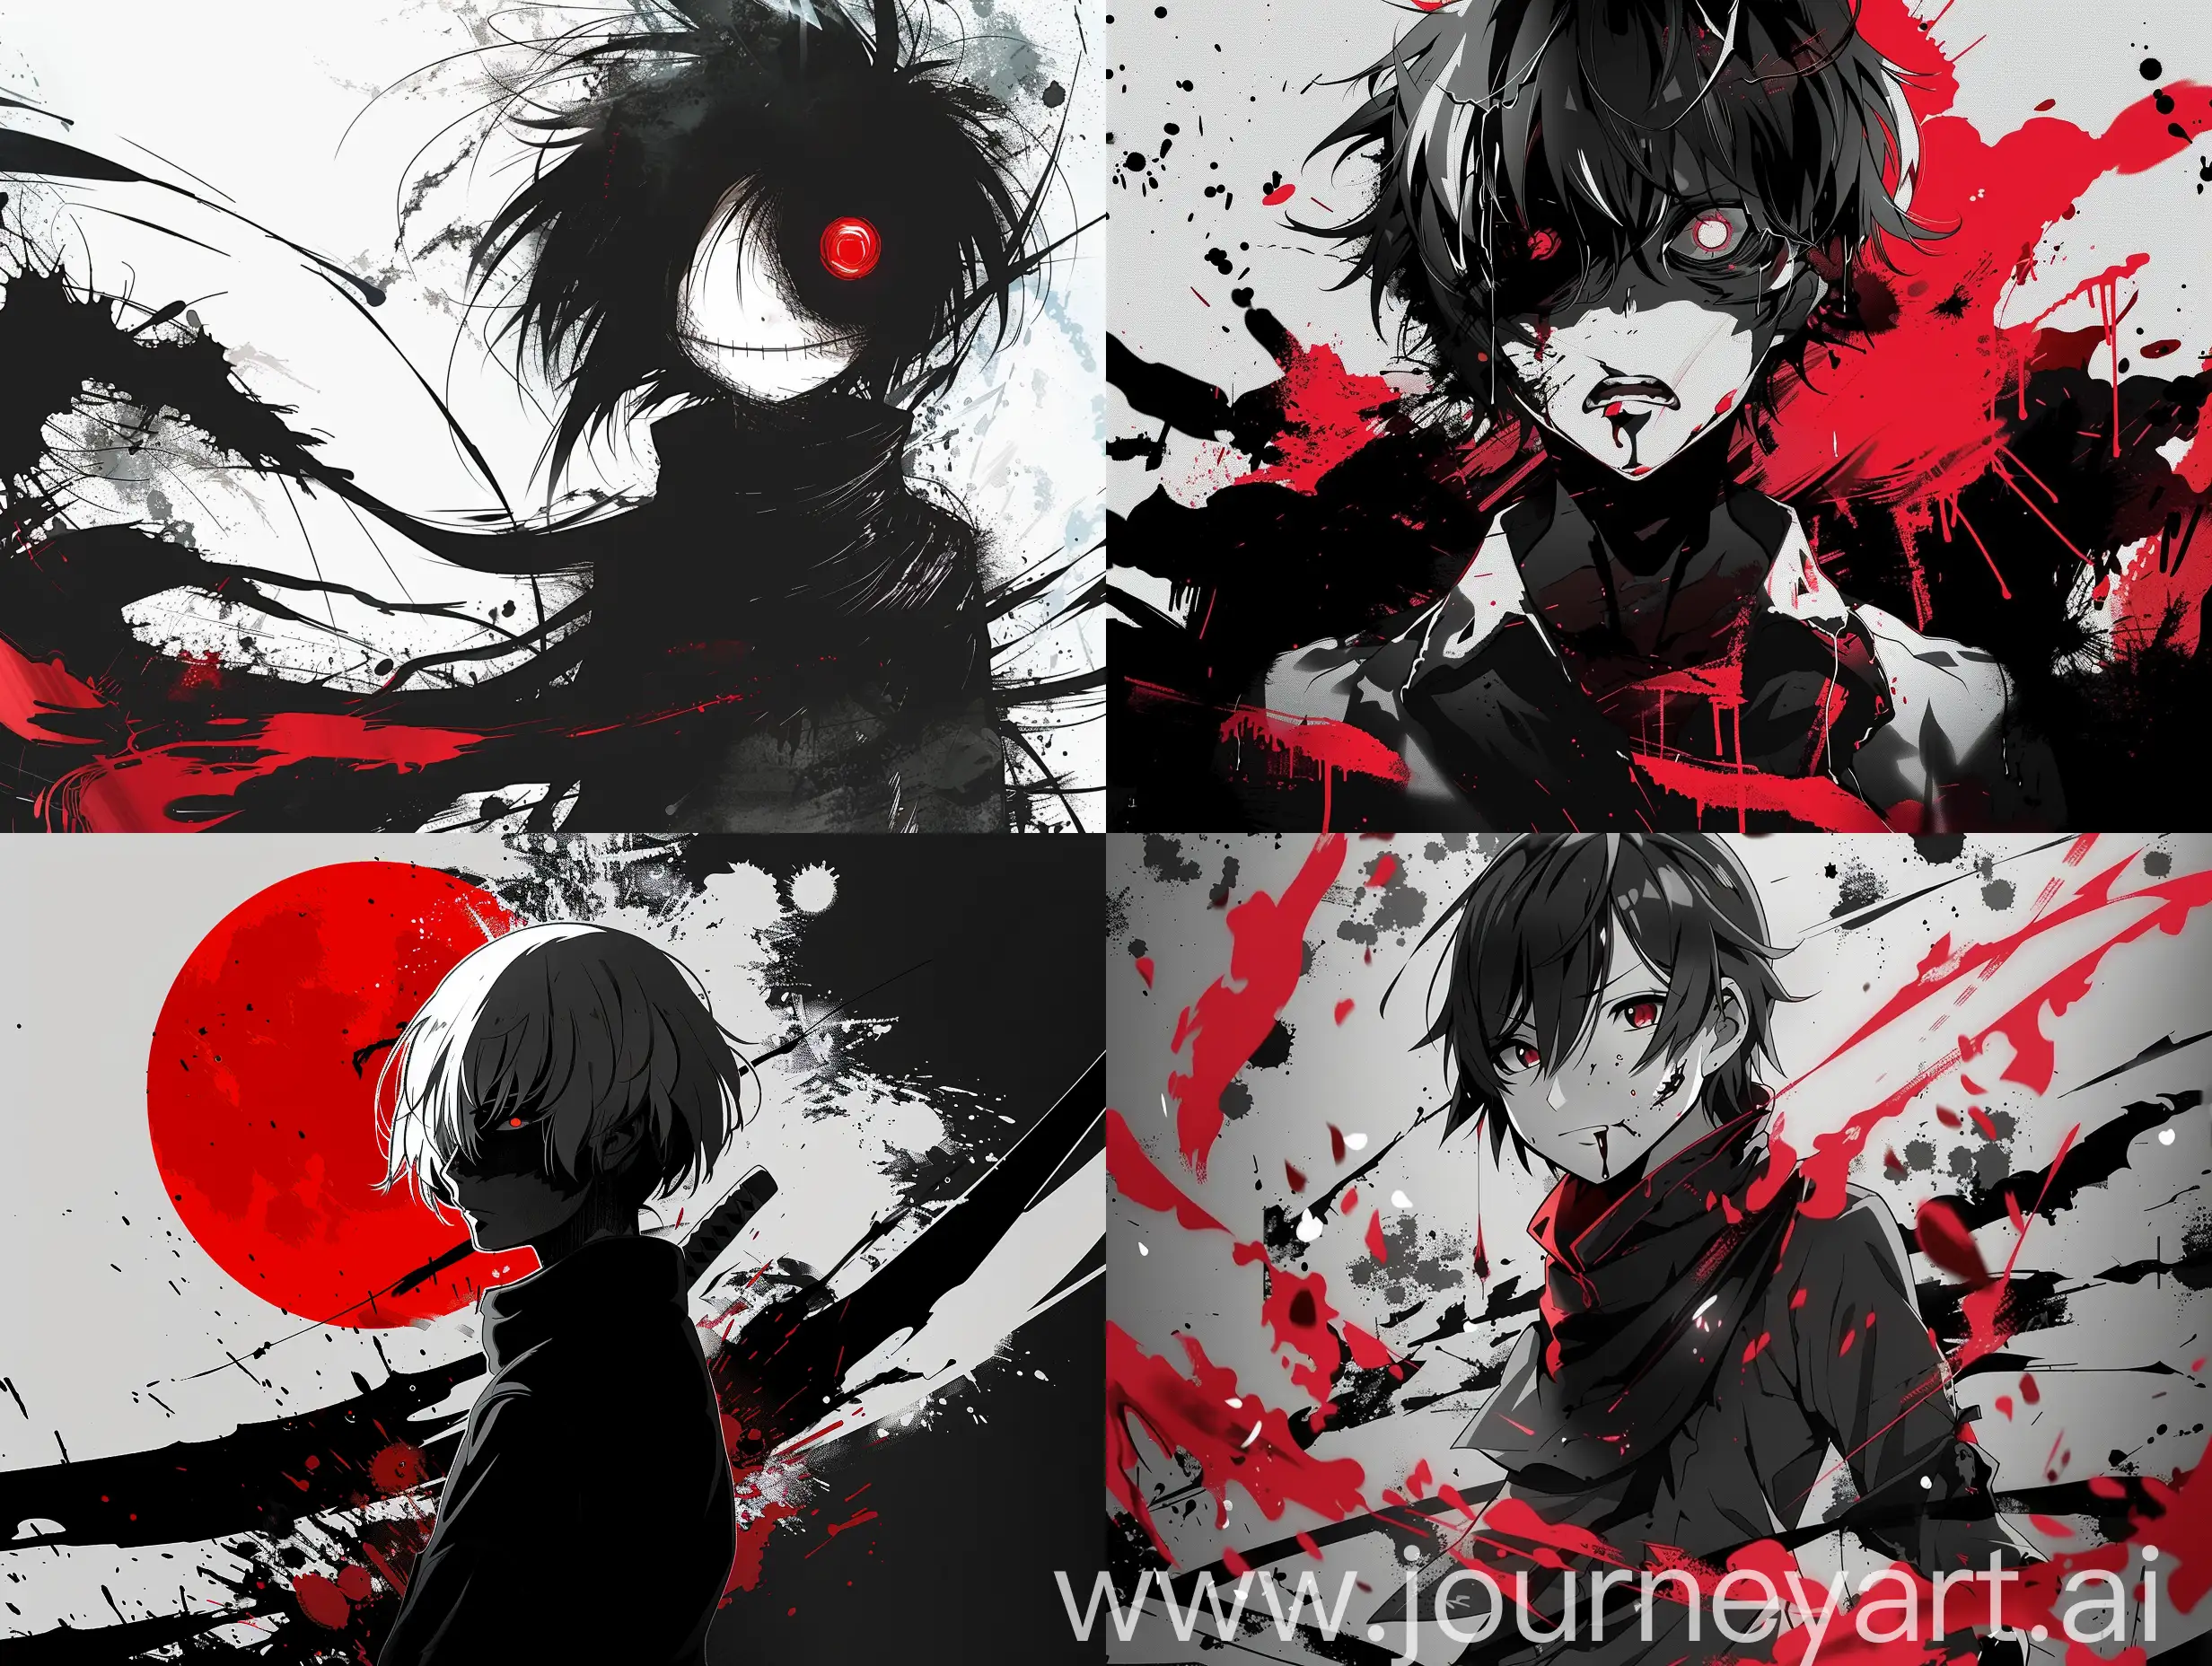 Banner, anime style, akudama drive, maniac character, in black red white tones